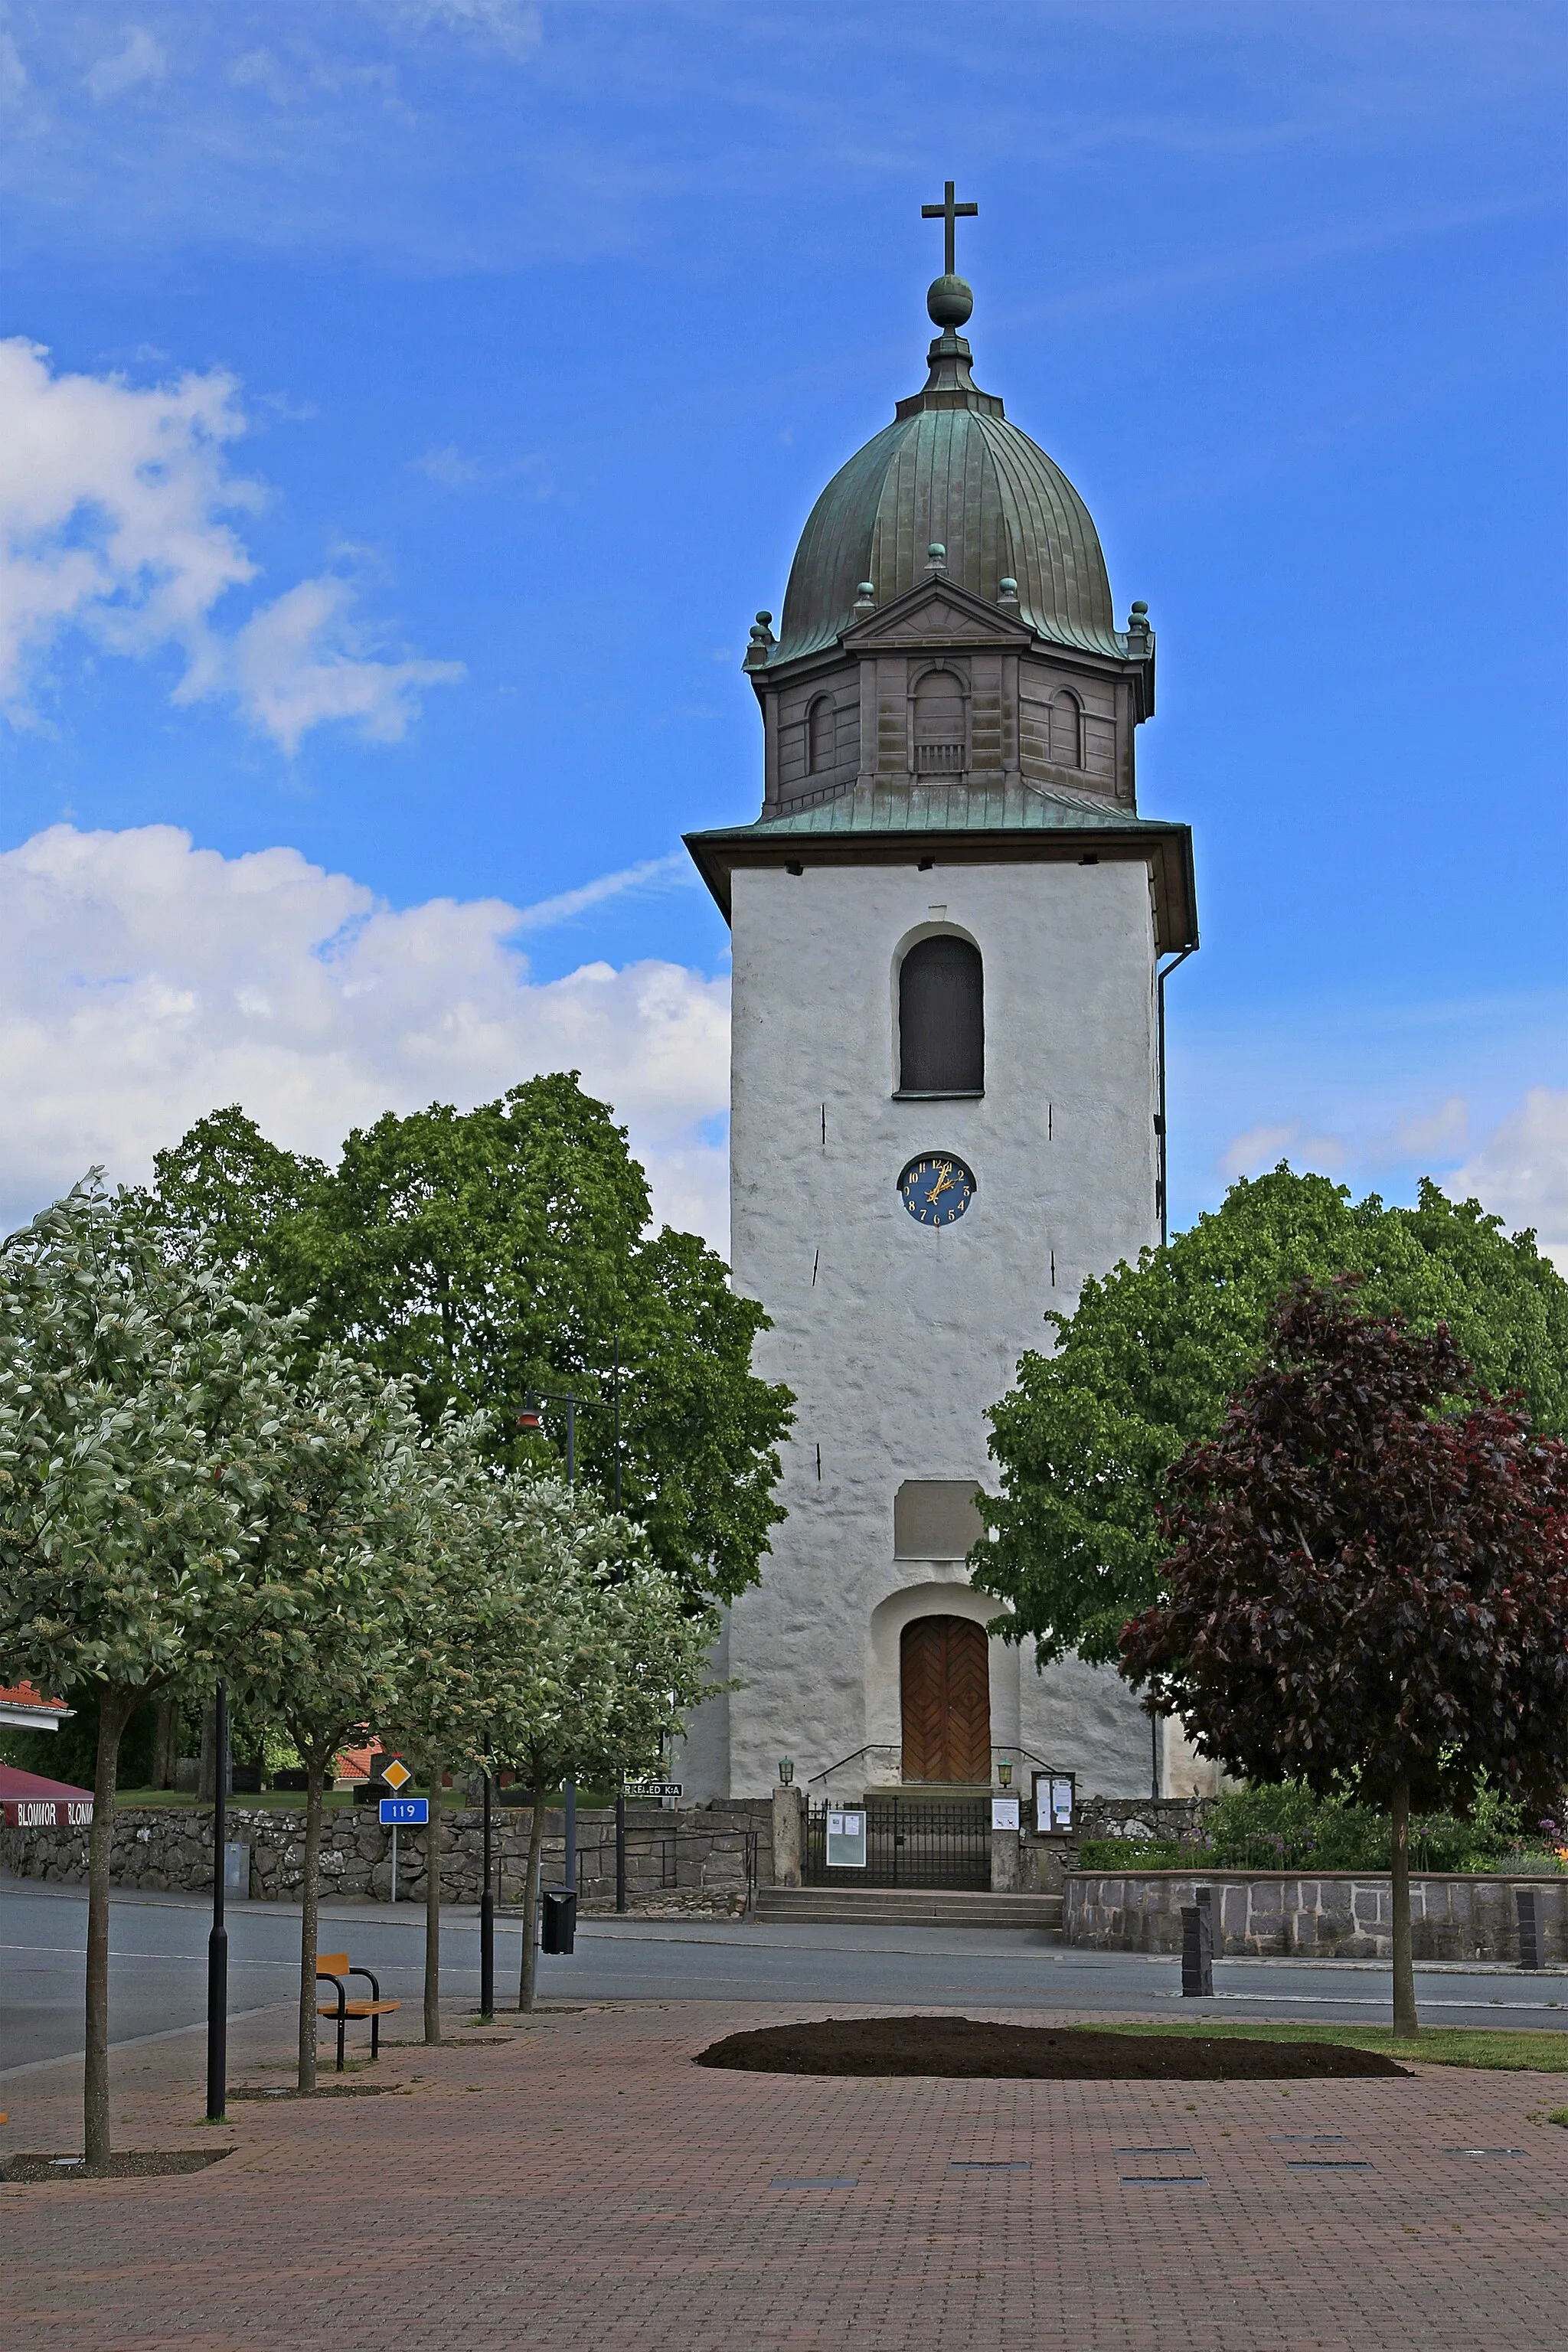 Photo showing: Church in Lönsboda (Örkeneds kyrka). The church was supposedly built in 1788. Lönsboda is a part of the municipality of Osby in the southern Swedish province of Skåne County.